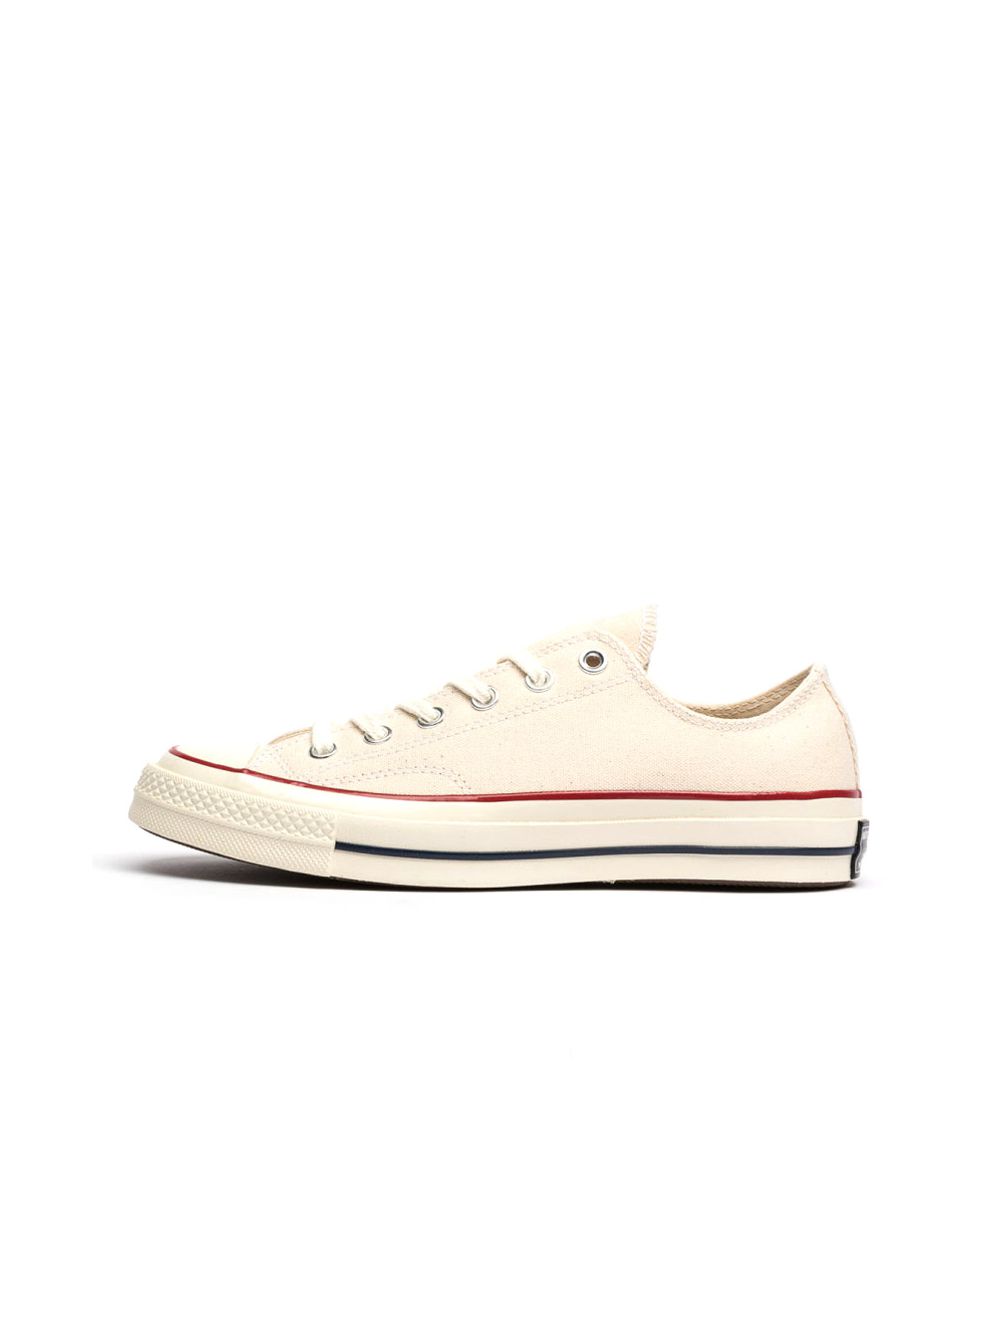 converse all star parchment